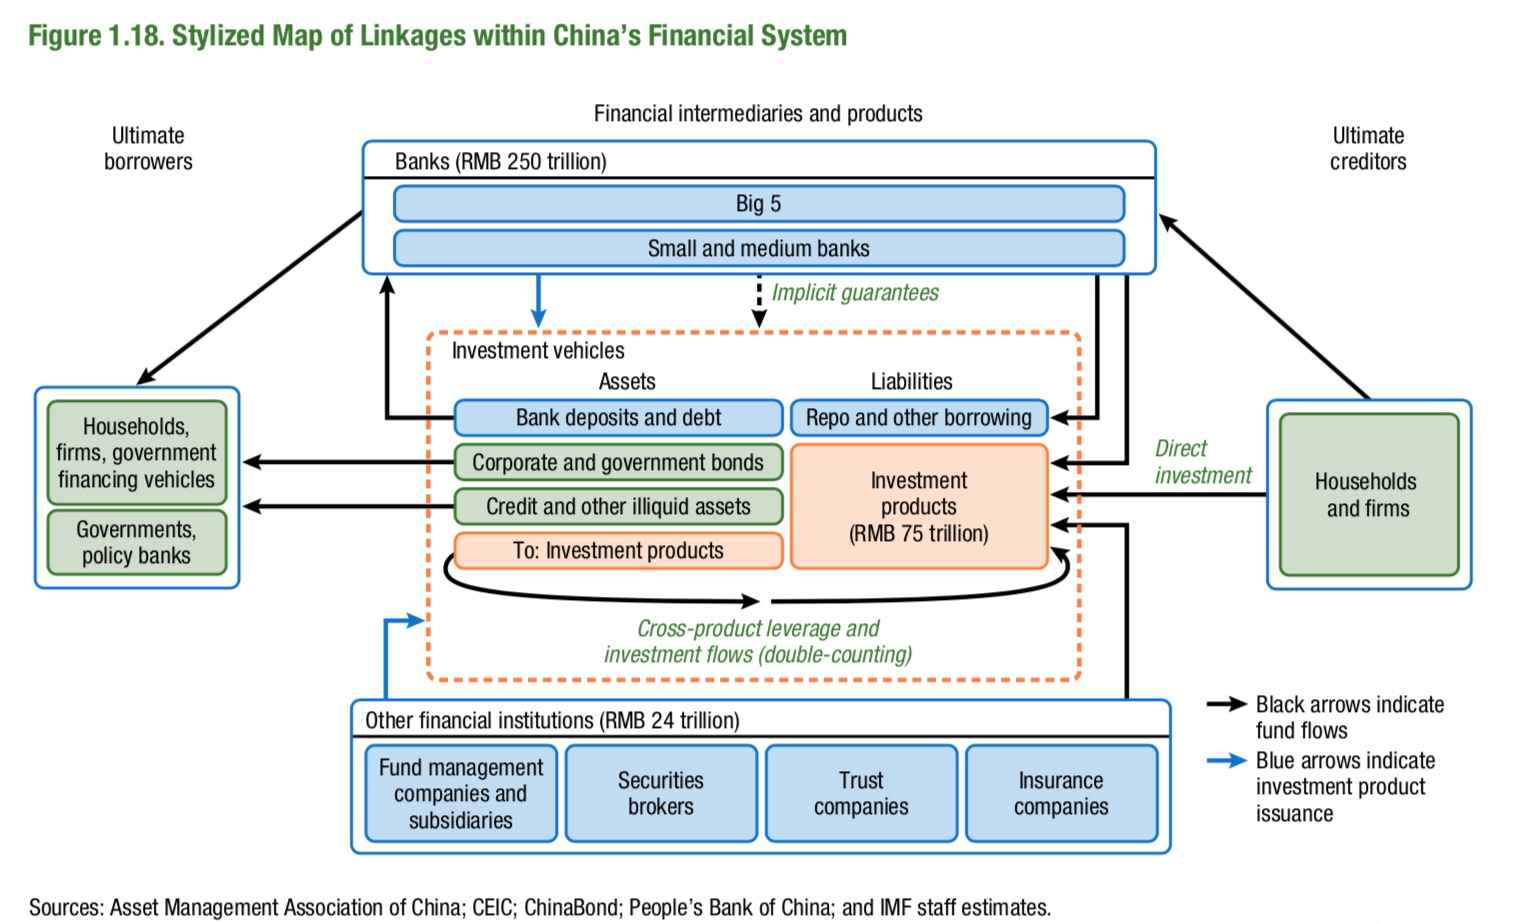 Diagram of linkages within China's financial system. Credit: IMF Global Stability Report, April 2018